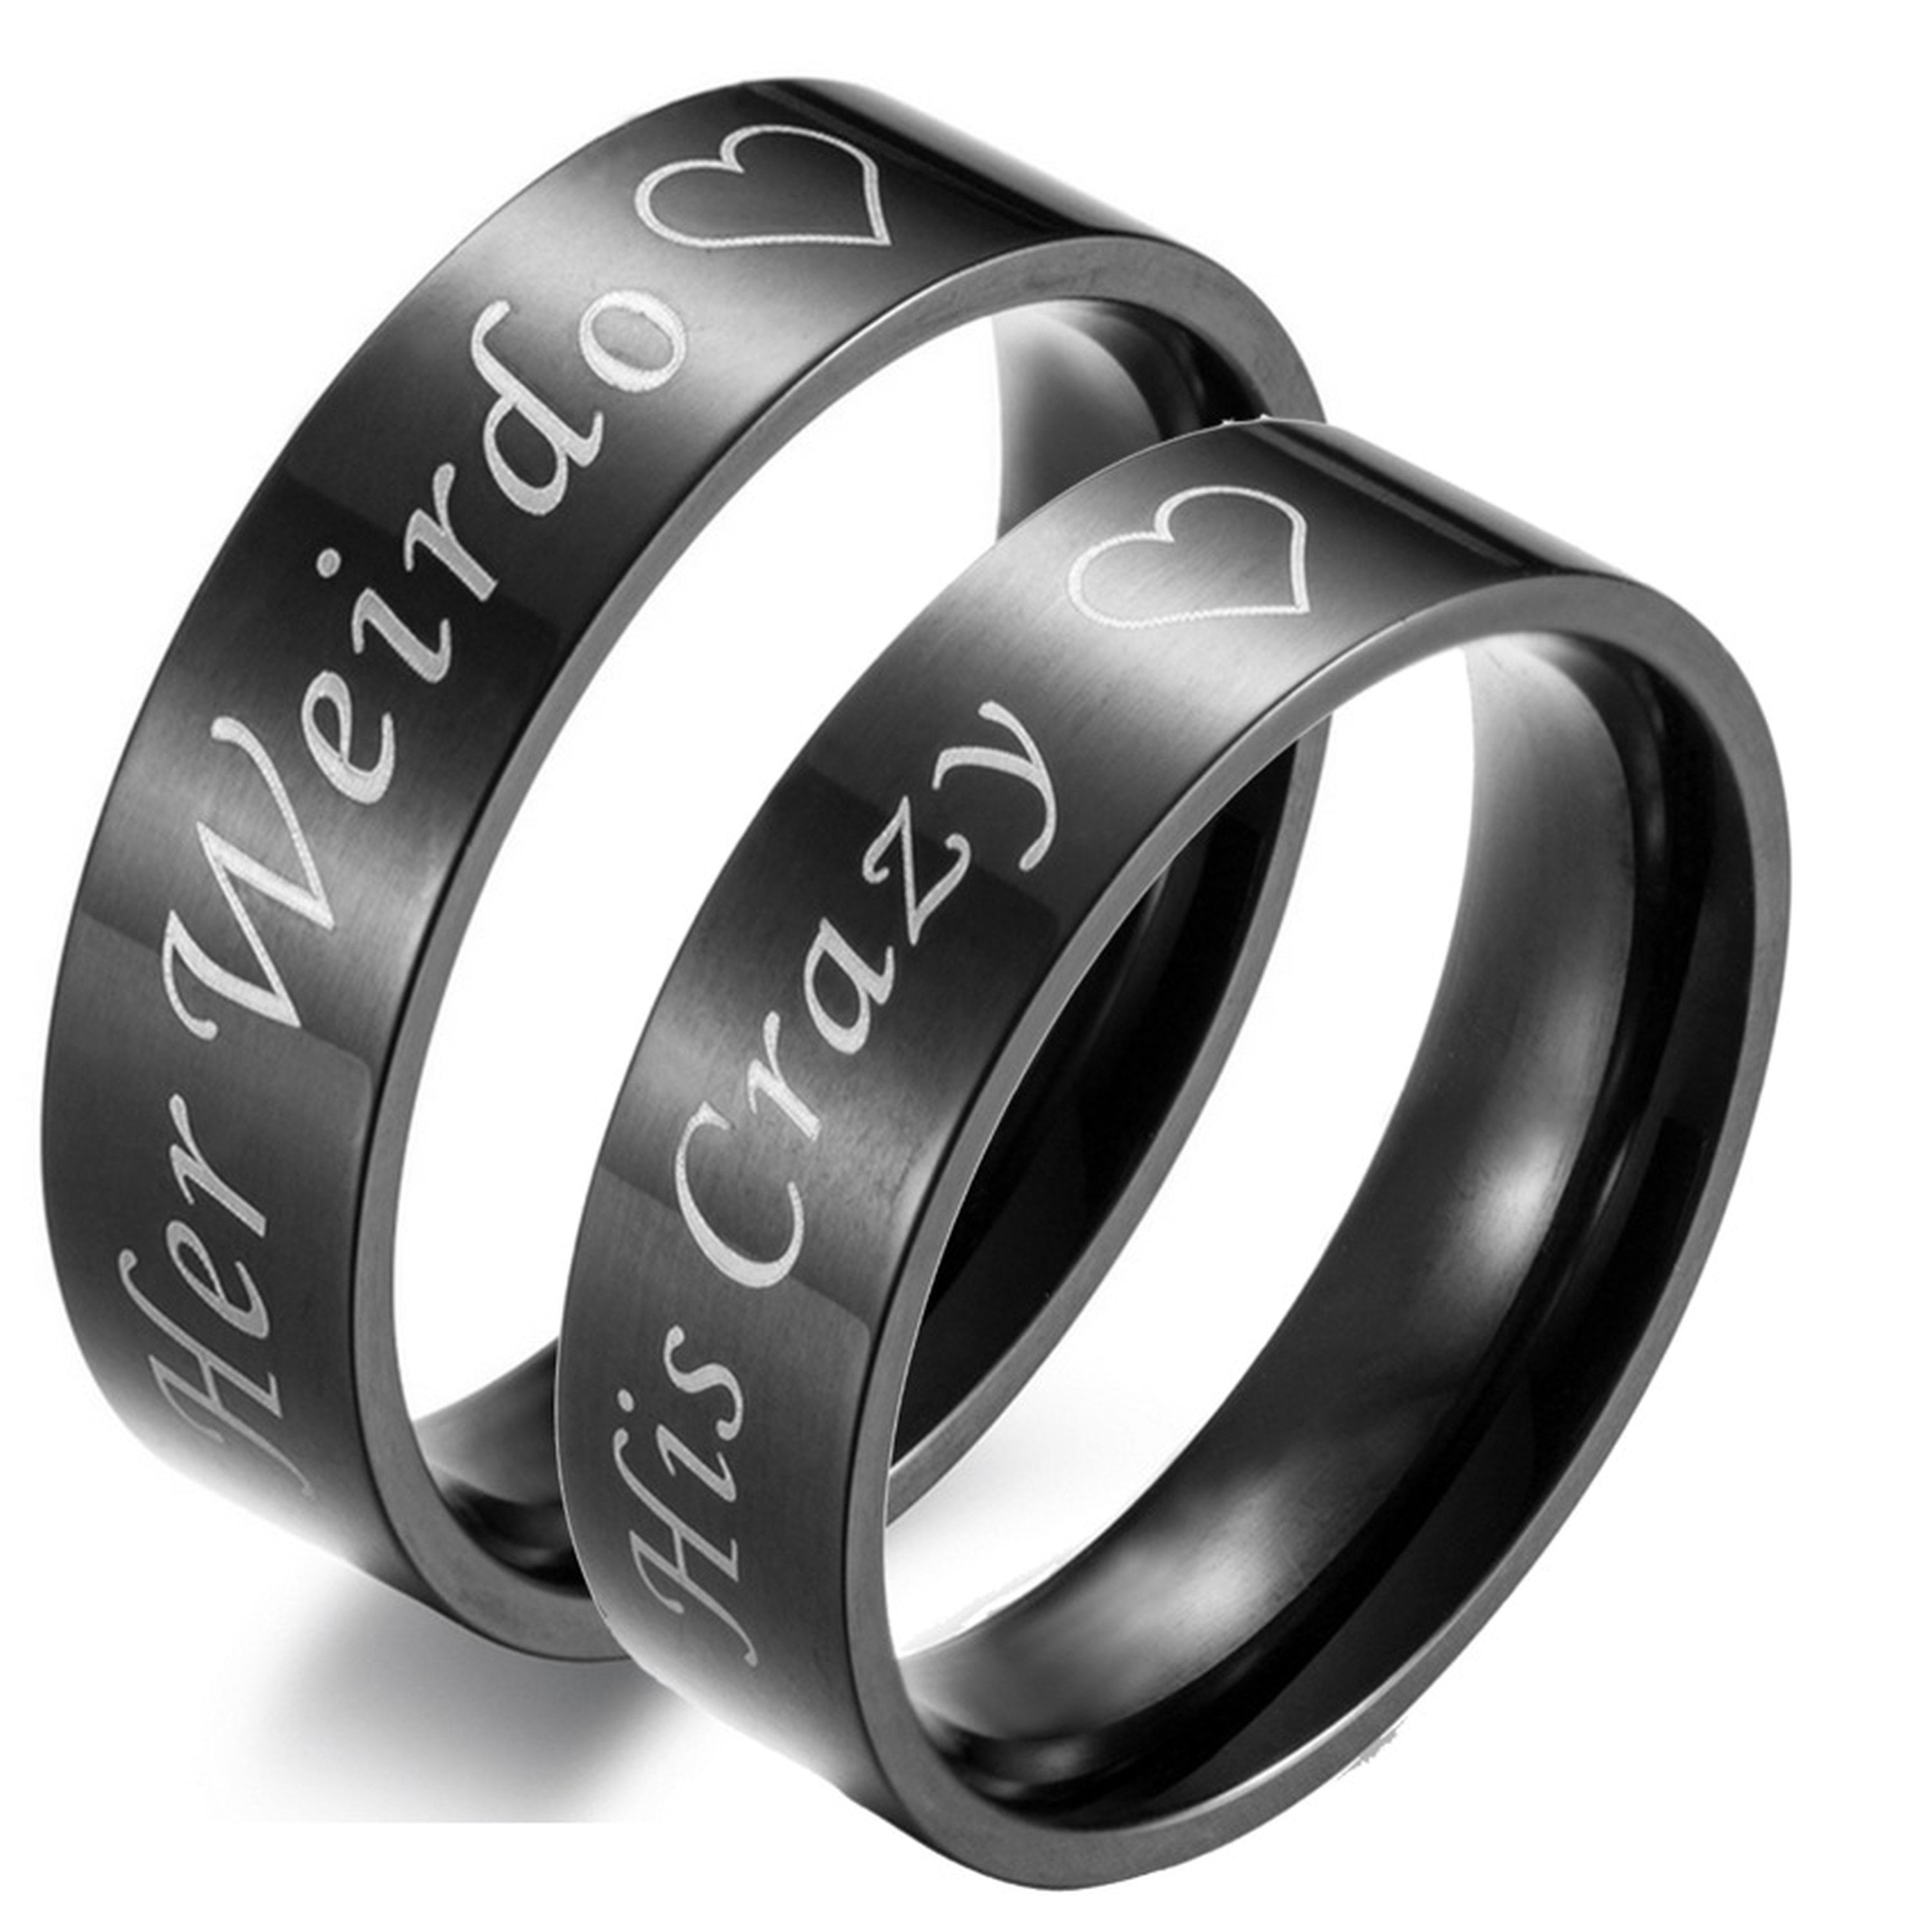 KY Jewelry Engraved Love Couples Ring Stainless Steel Lovers Rings Wedding Engagement for Him & Her Set